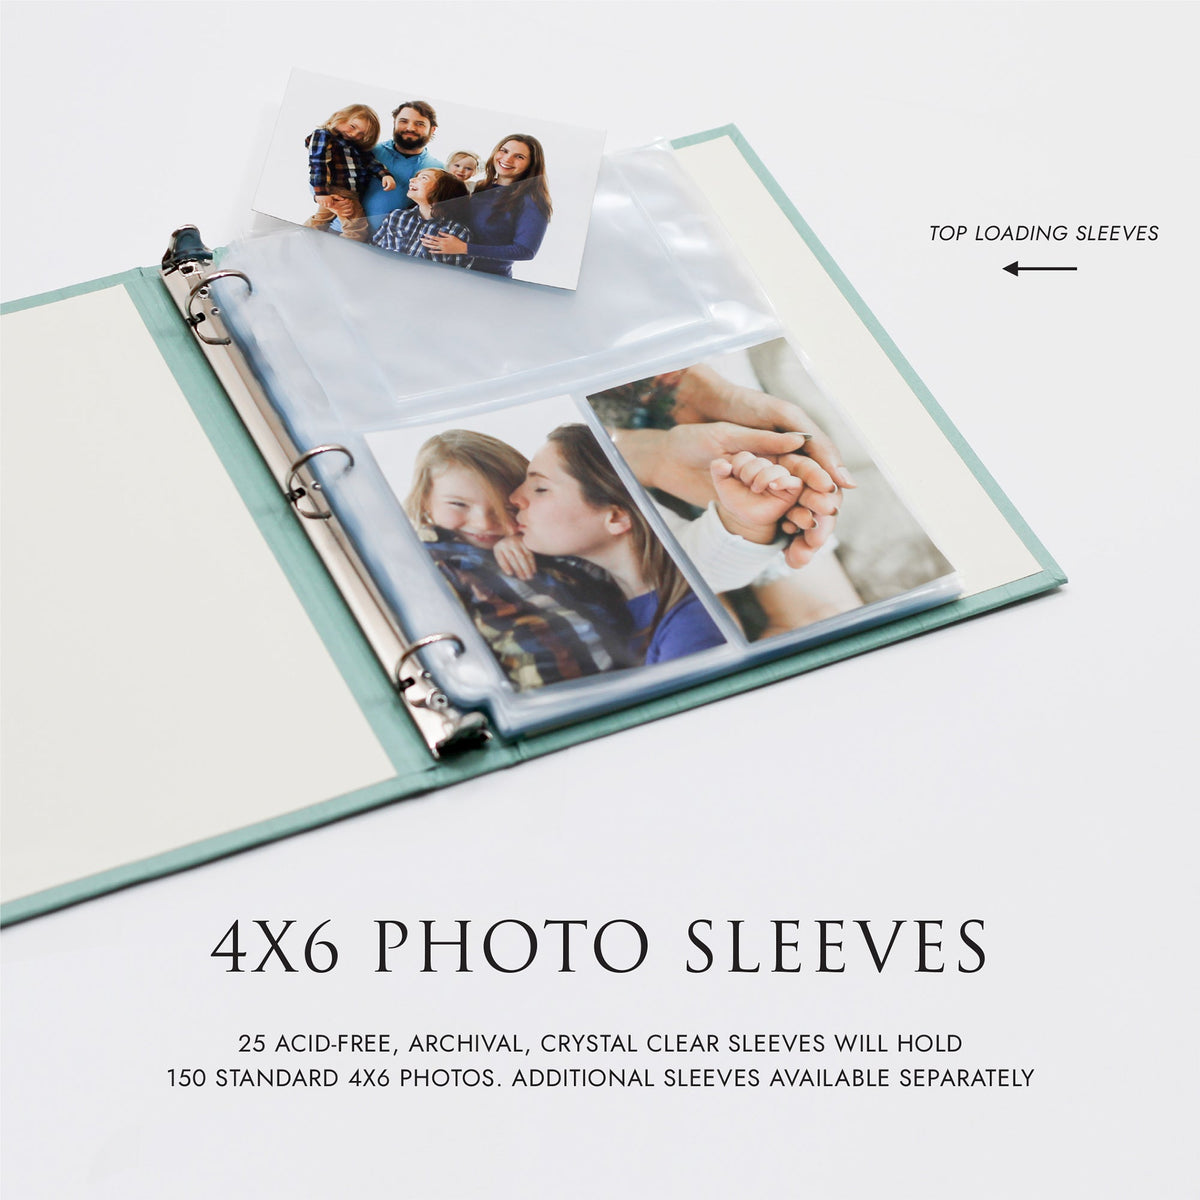 Large Photo Binder (for 4x6 photos) with Celery Cotton Cover